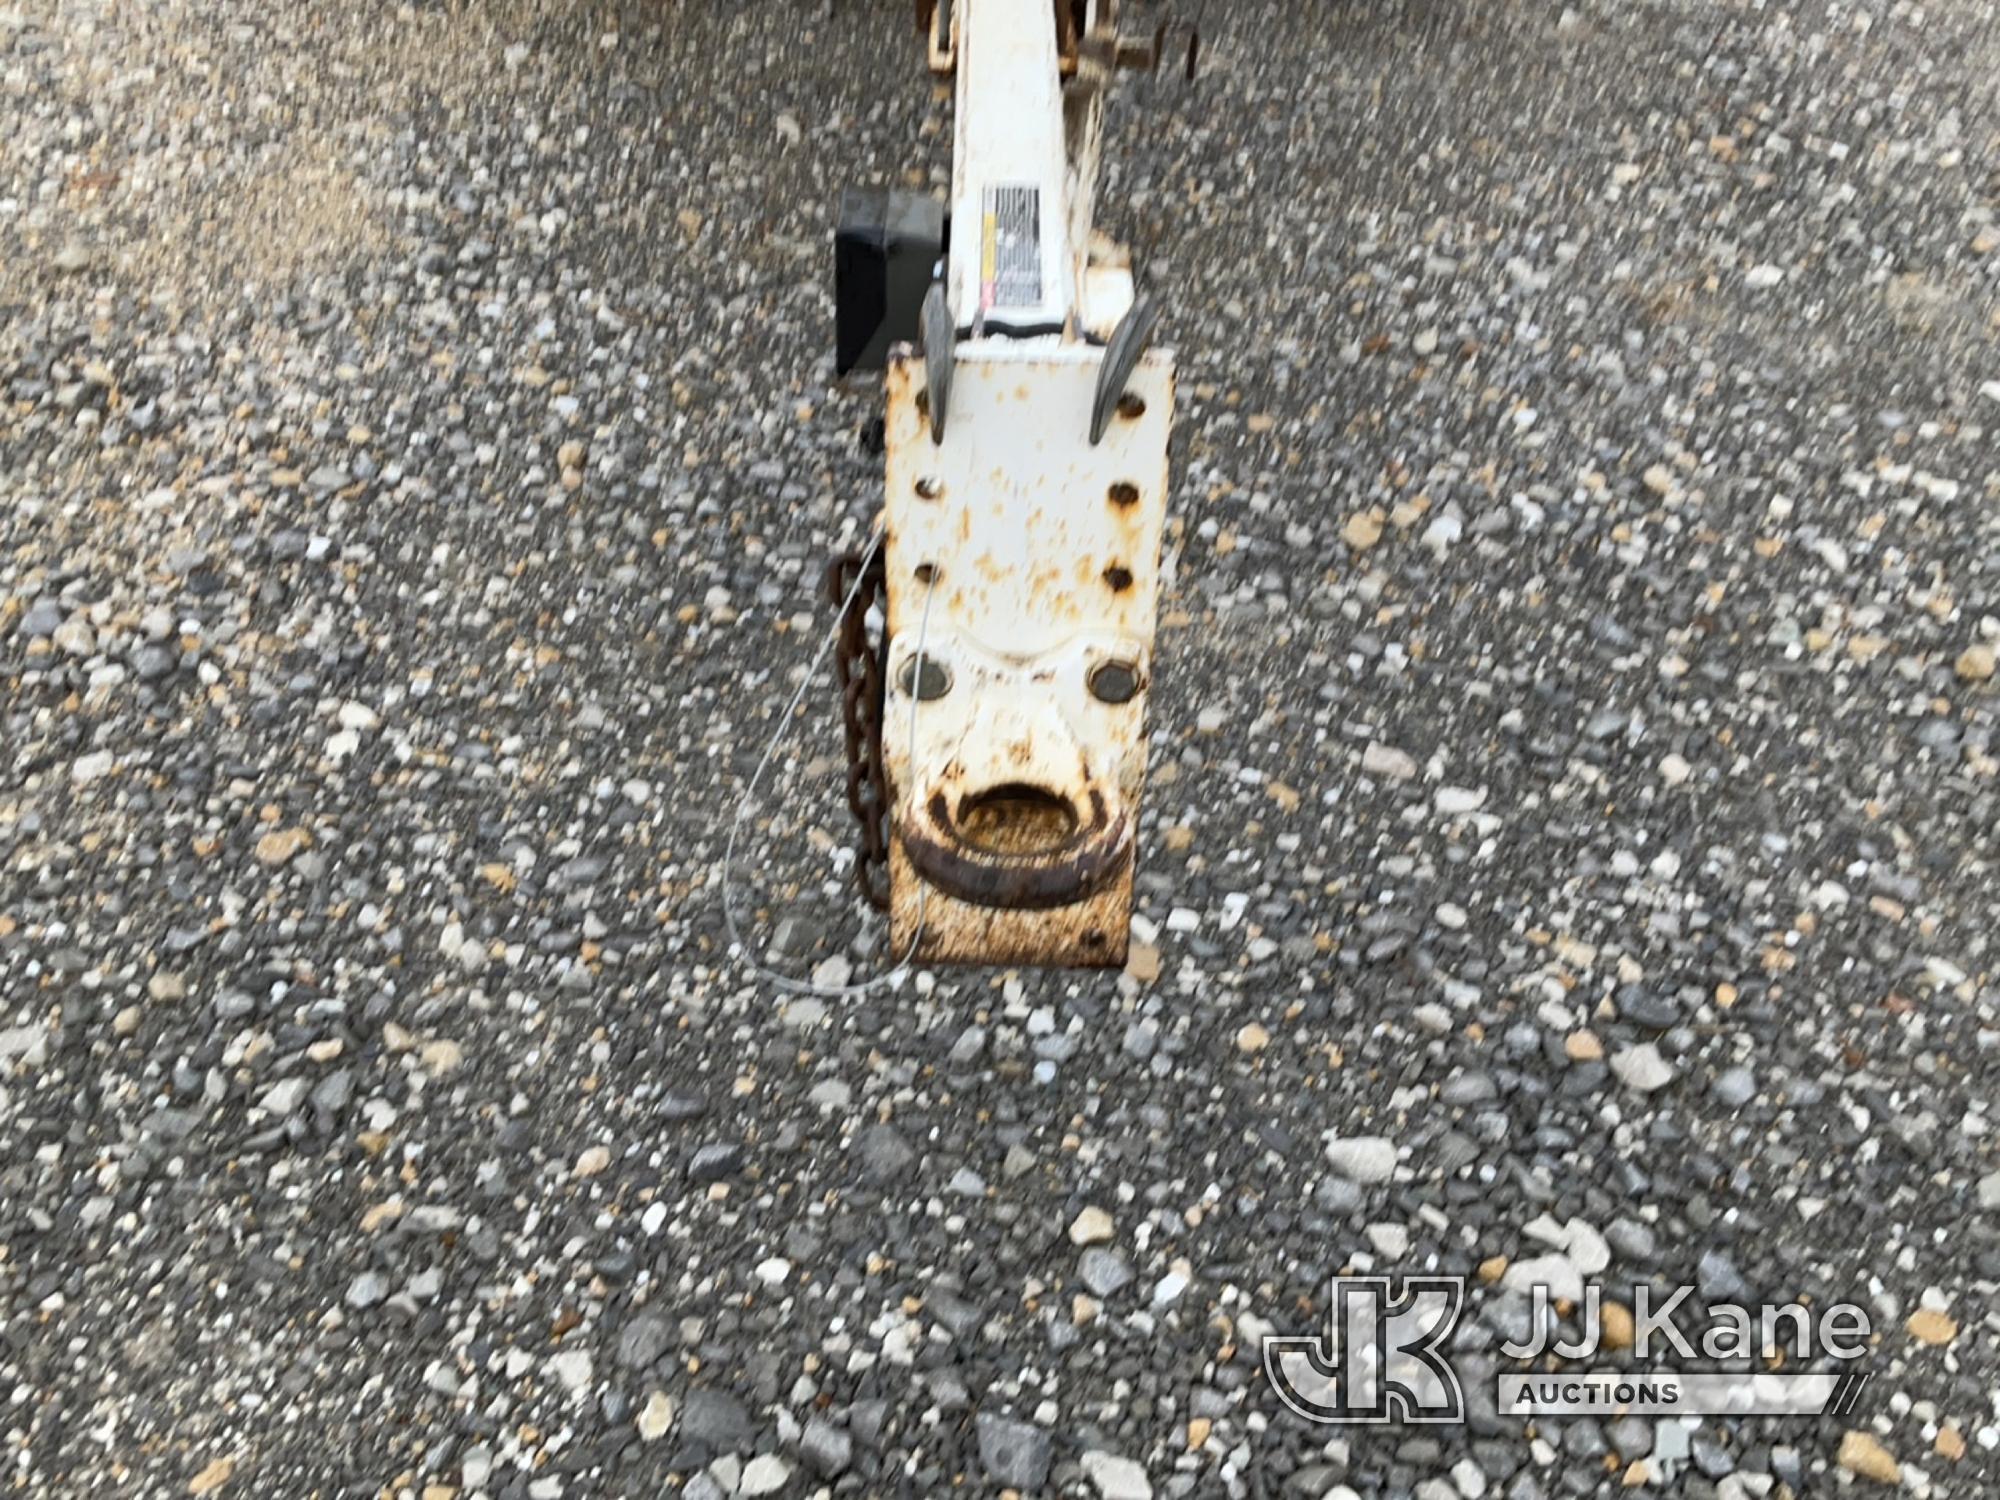 (Hawk Point, MO) 2013 Brooks Brothers PT92-7KE T/A Pole/Material Trailer Surface Rust.